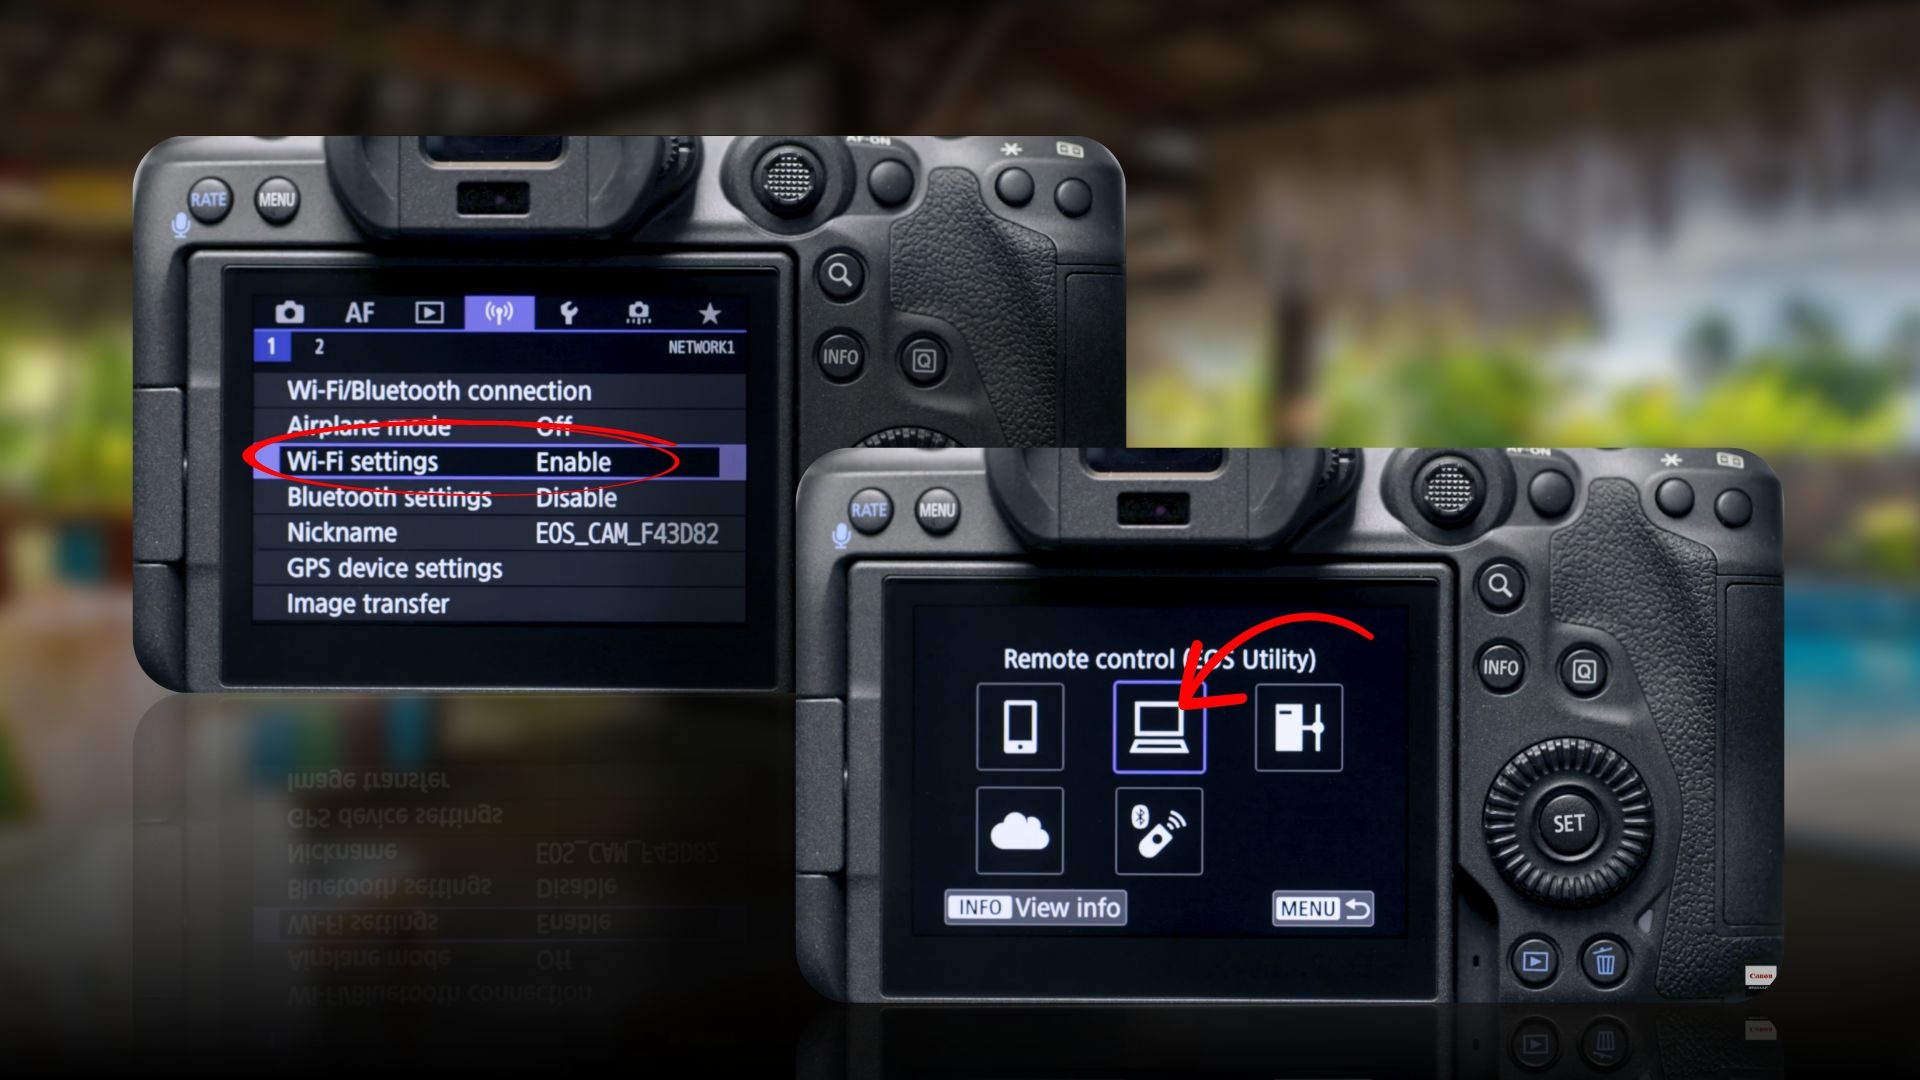 Step-by-step process on connecting Canon camera wirelessly to Mac